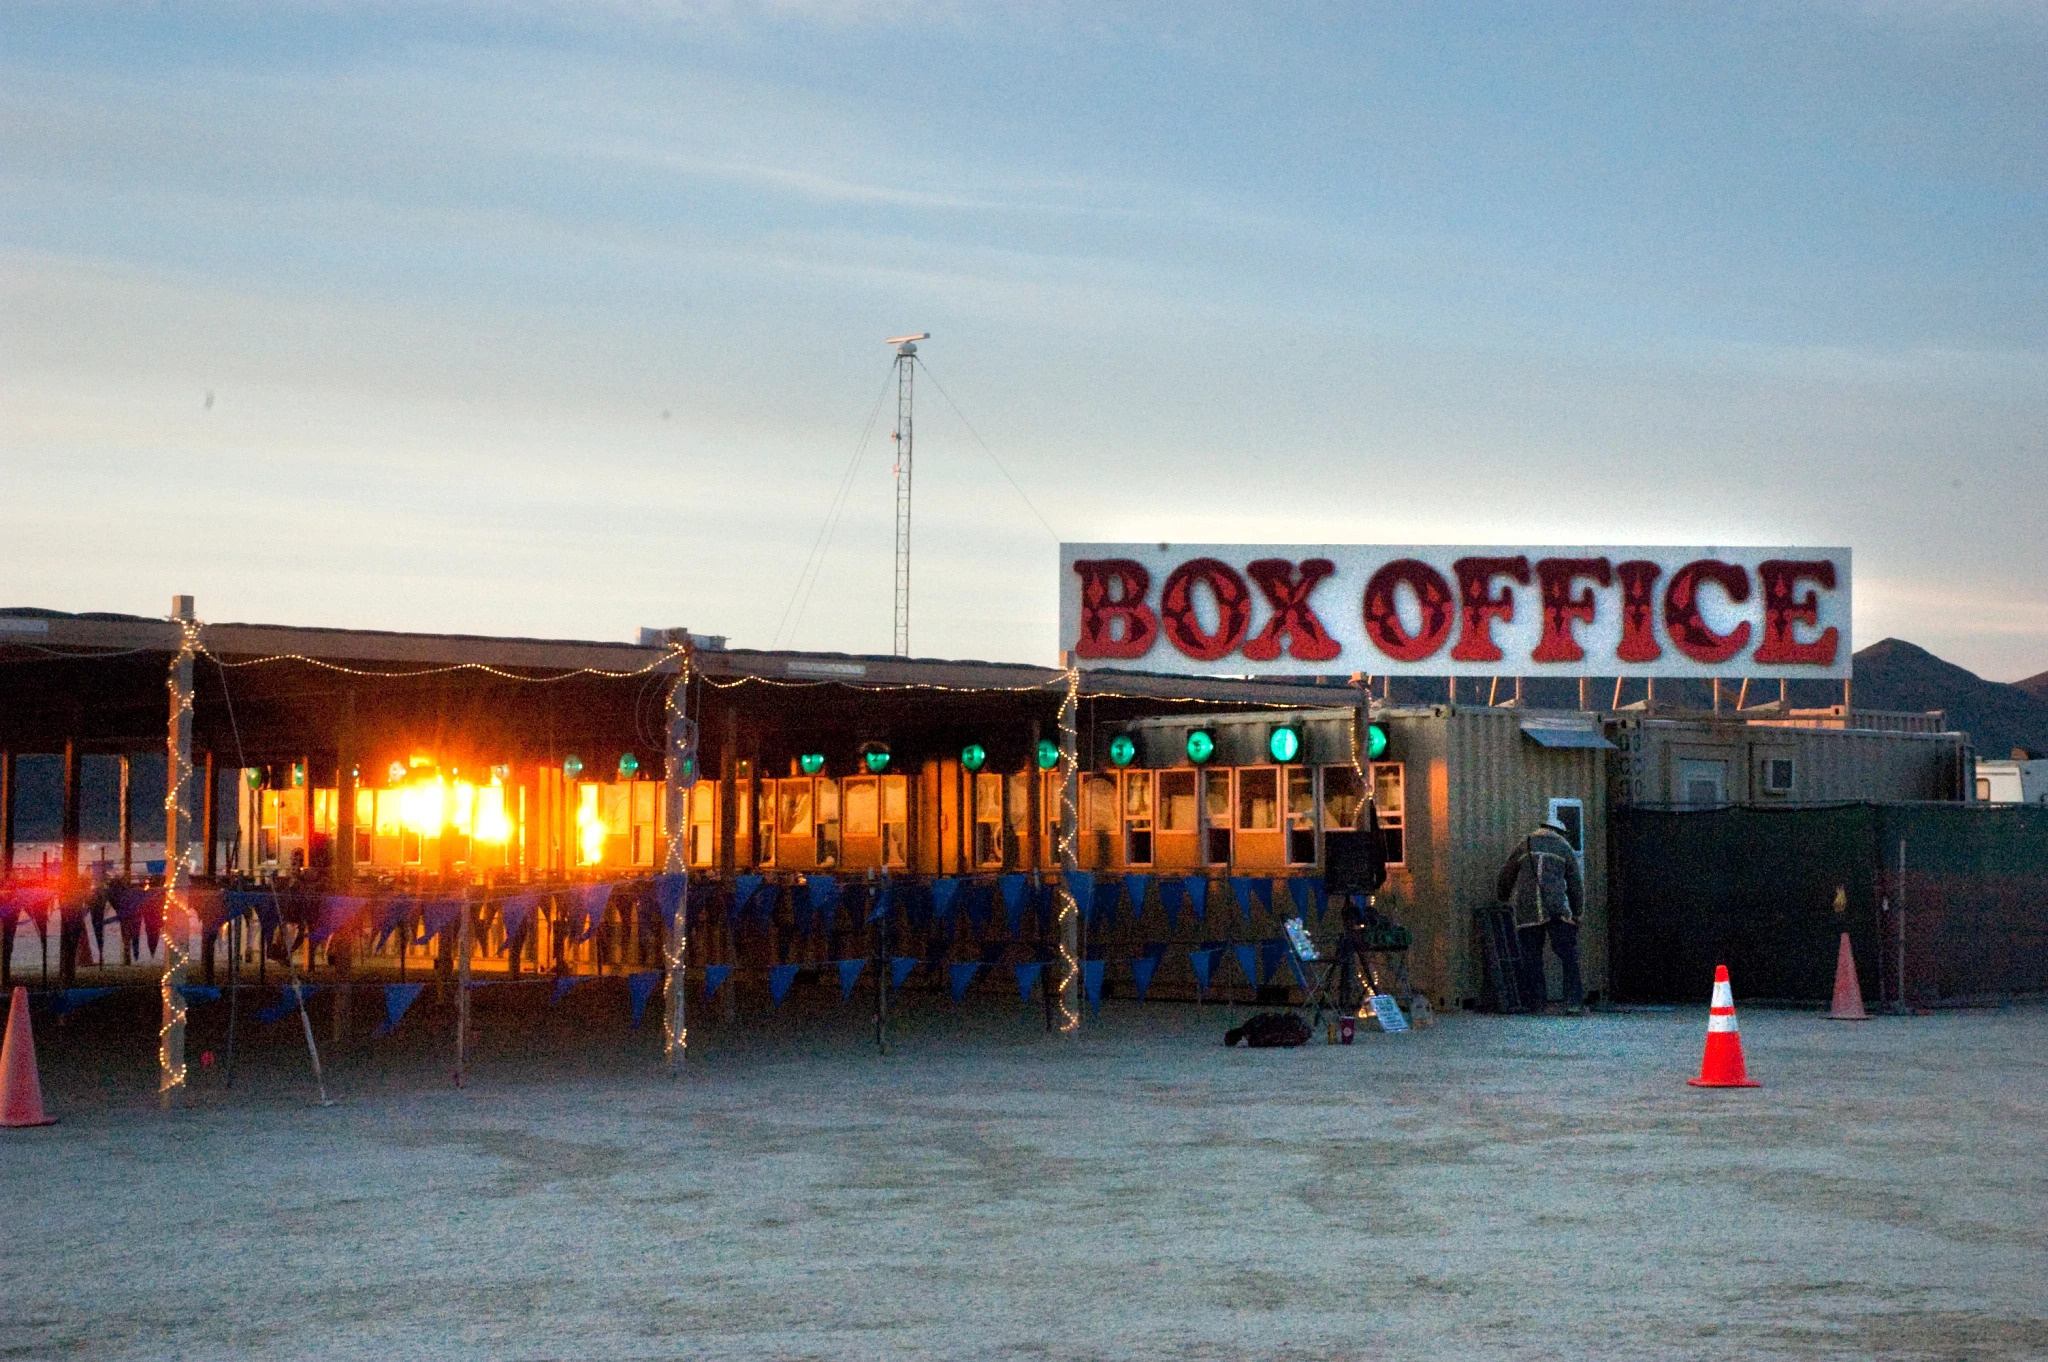 The empty box office in the fading daylight at Burning Man